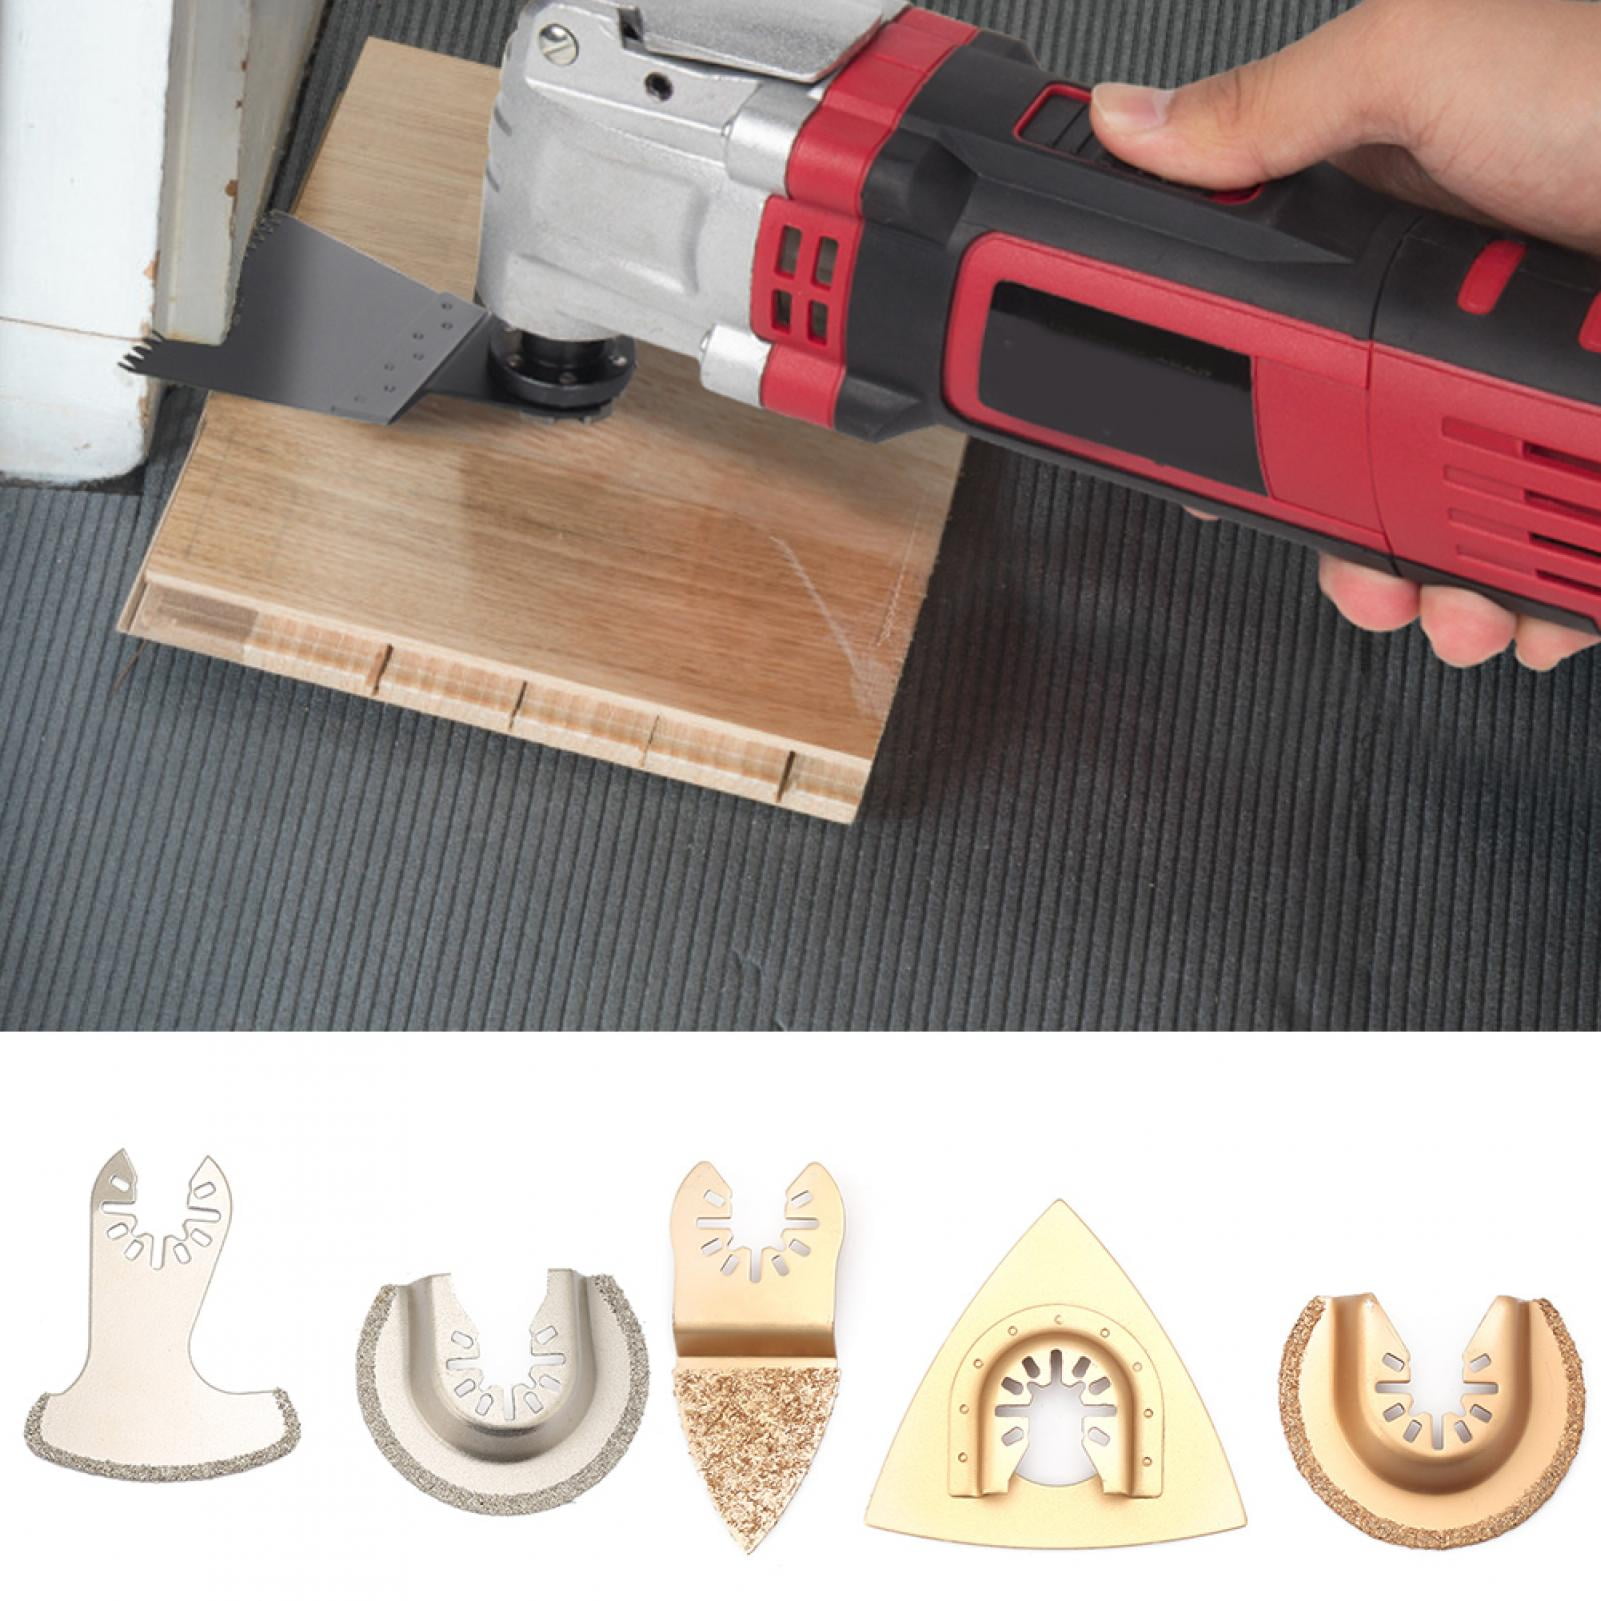 20 PCS Oscillating Multi Tool Saw Cutters For Wood Floor Cutting Saw Blade 